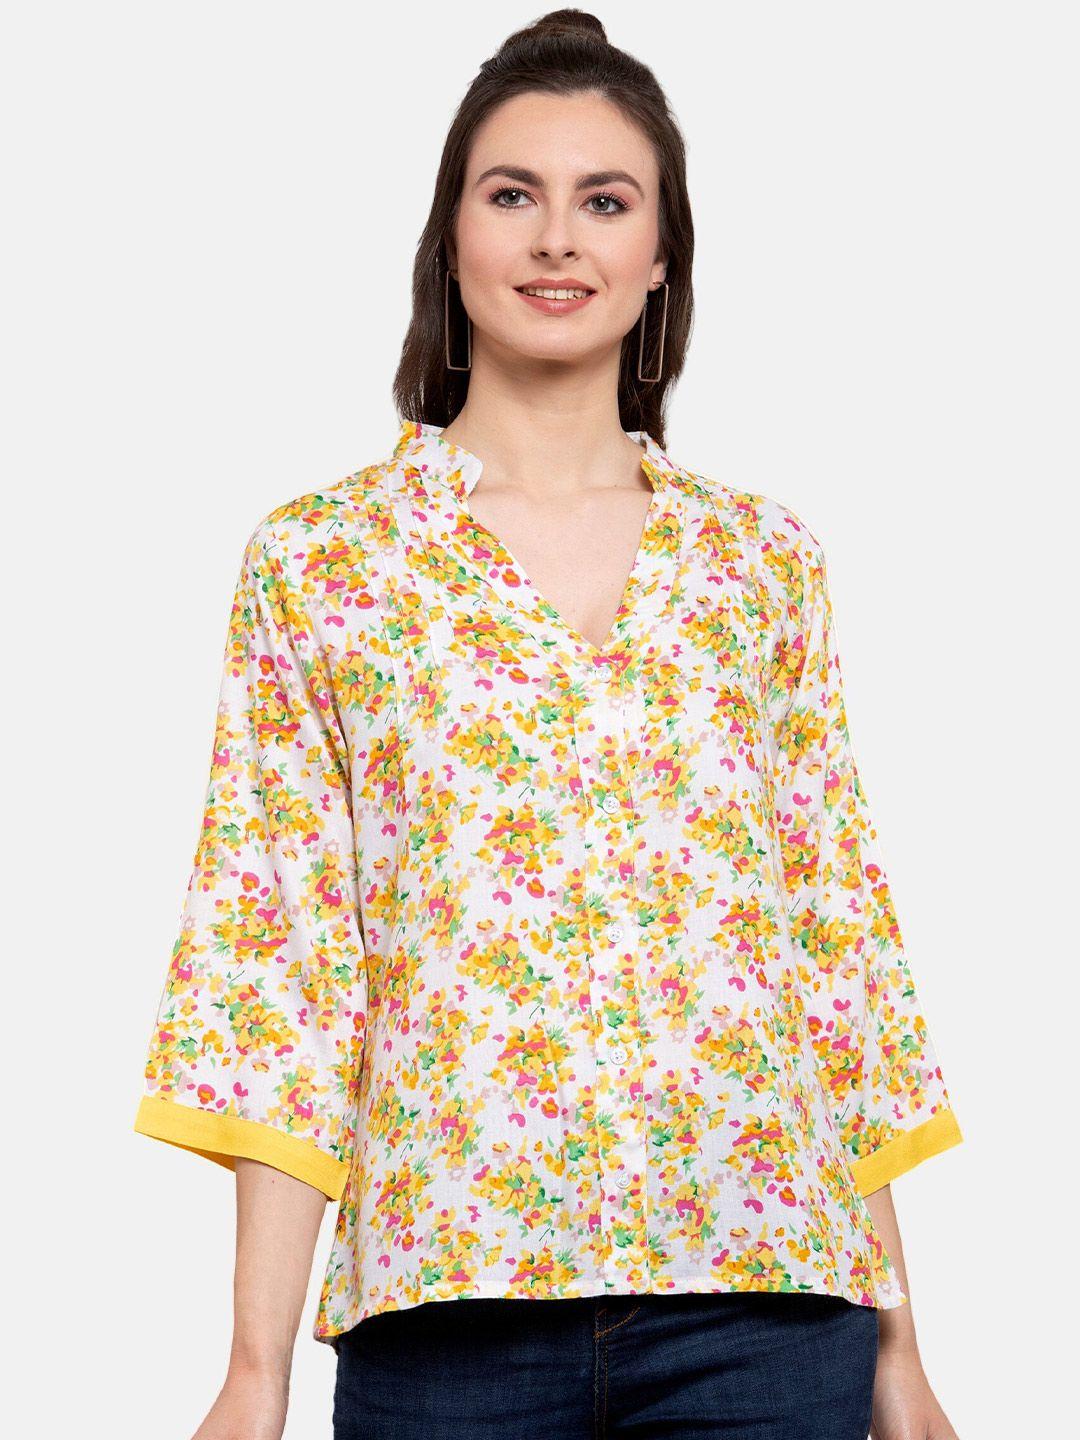 patrorna plus size women yellow comfort floral printed casual shirt